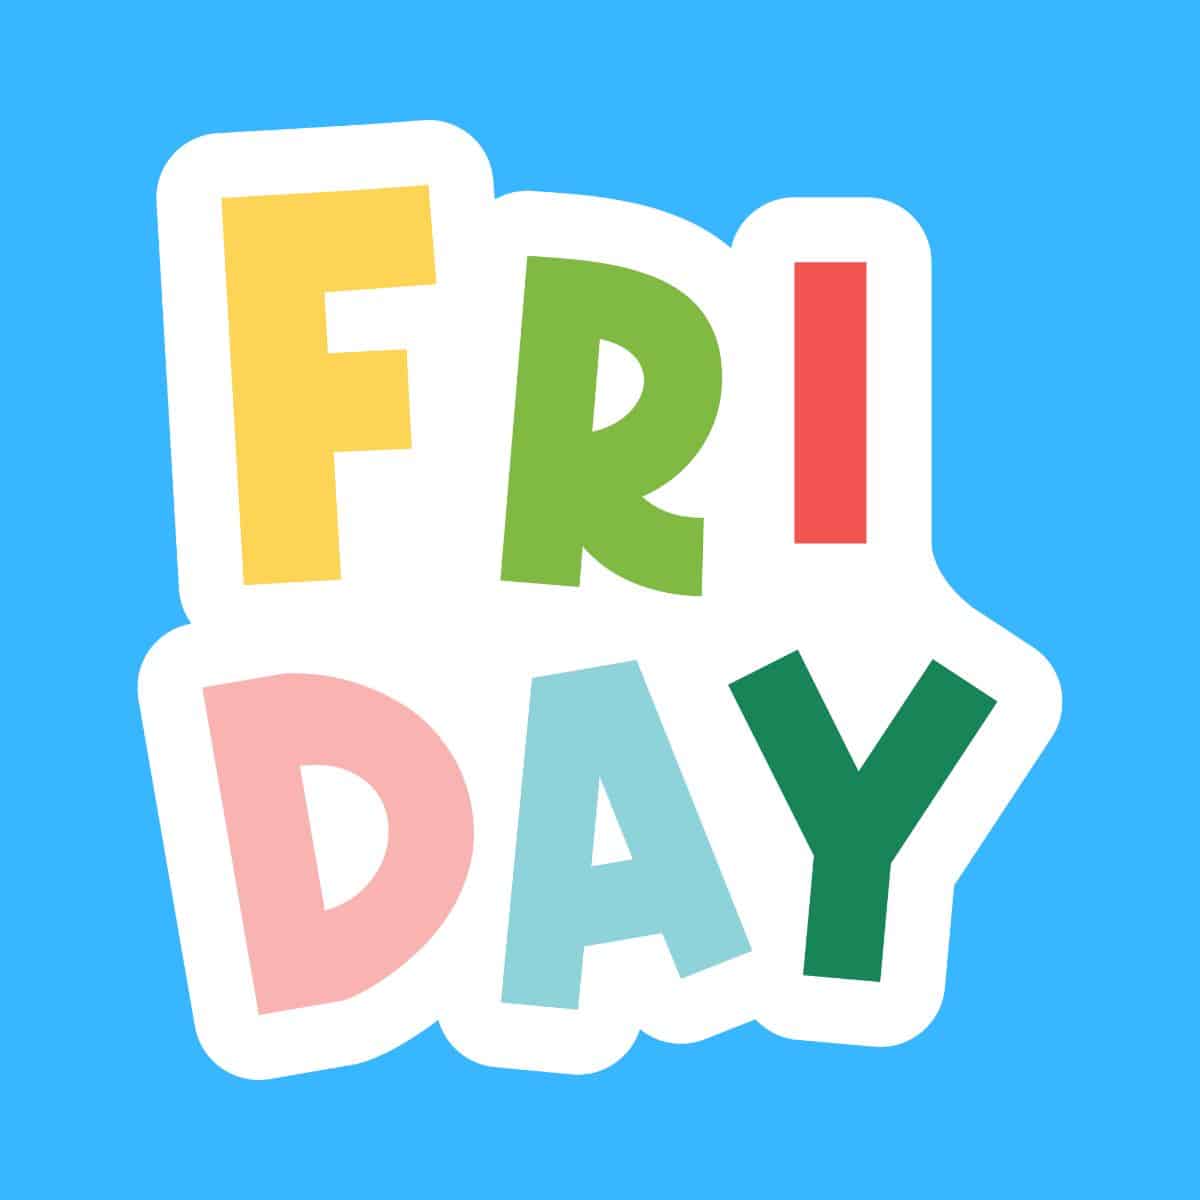 Cartoon graphic of sign saying friday on blue background.